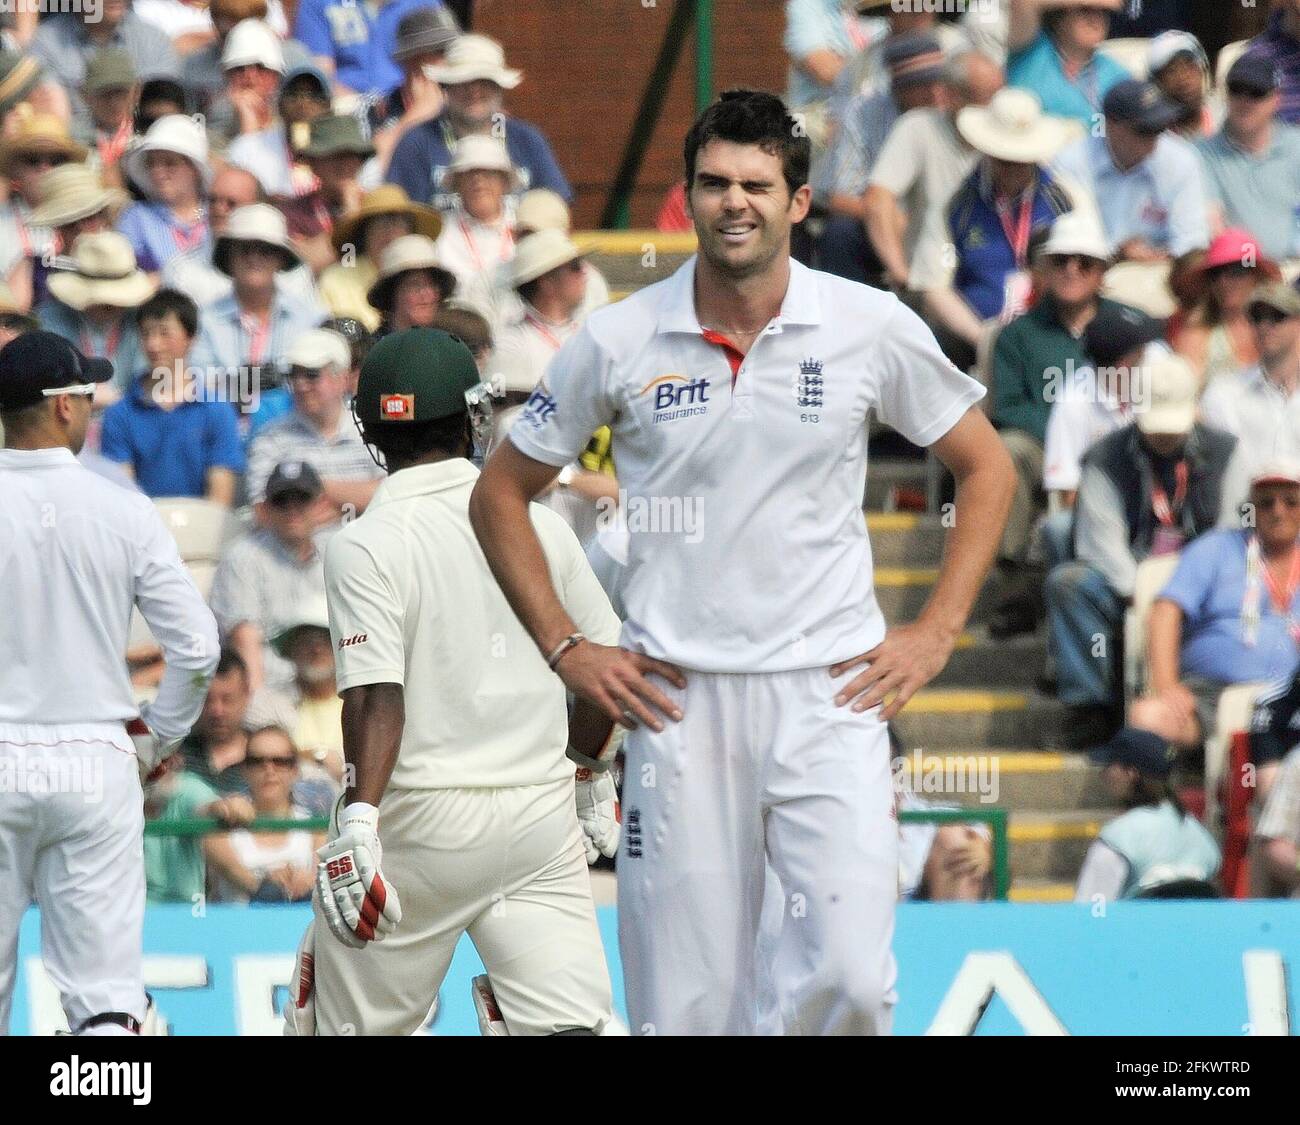 CRICKET ENGLAND V BANGLADESH 2nd TEST AT OLD TRAFFORD  2nd DAY 5/6/2010. JIMMY ANDERSON.  PICTURE DAVID ASHDOWN Stock Photo